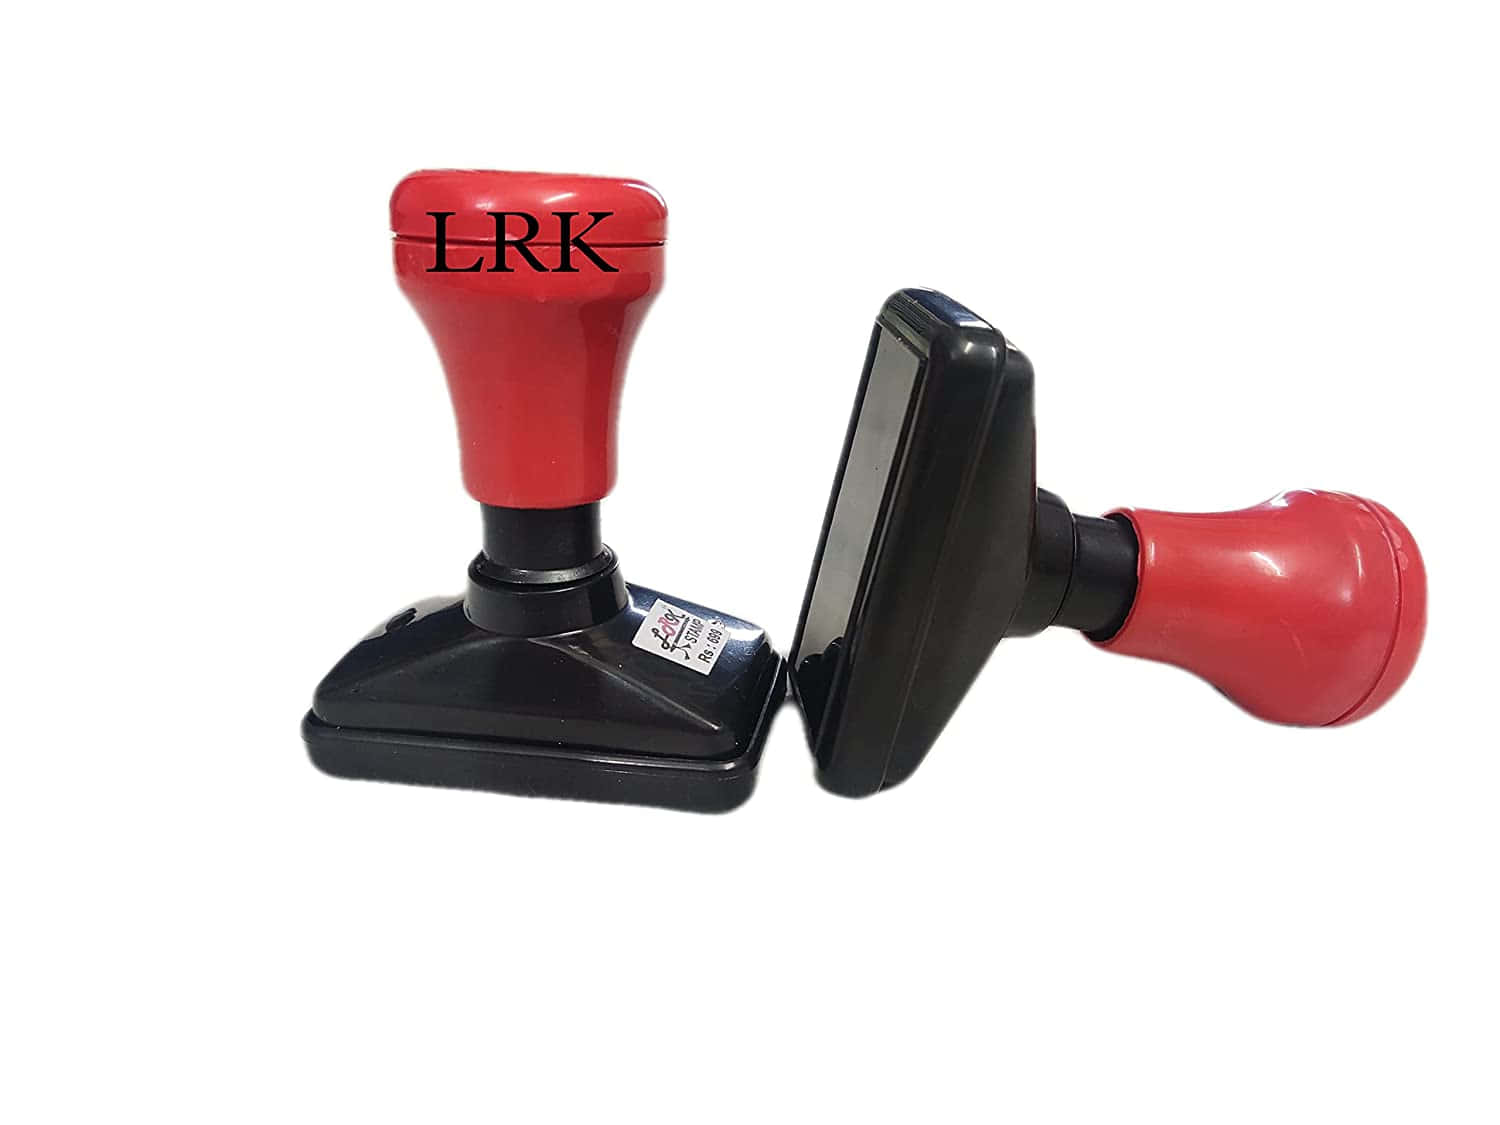 Two Rubber Stamps With The Word Lrk On Them